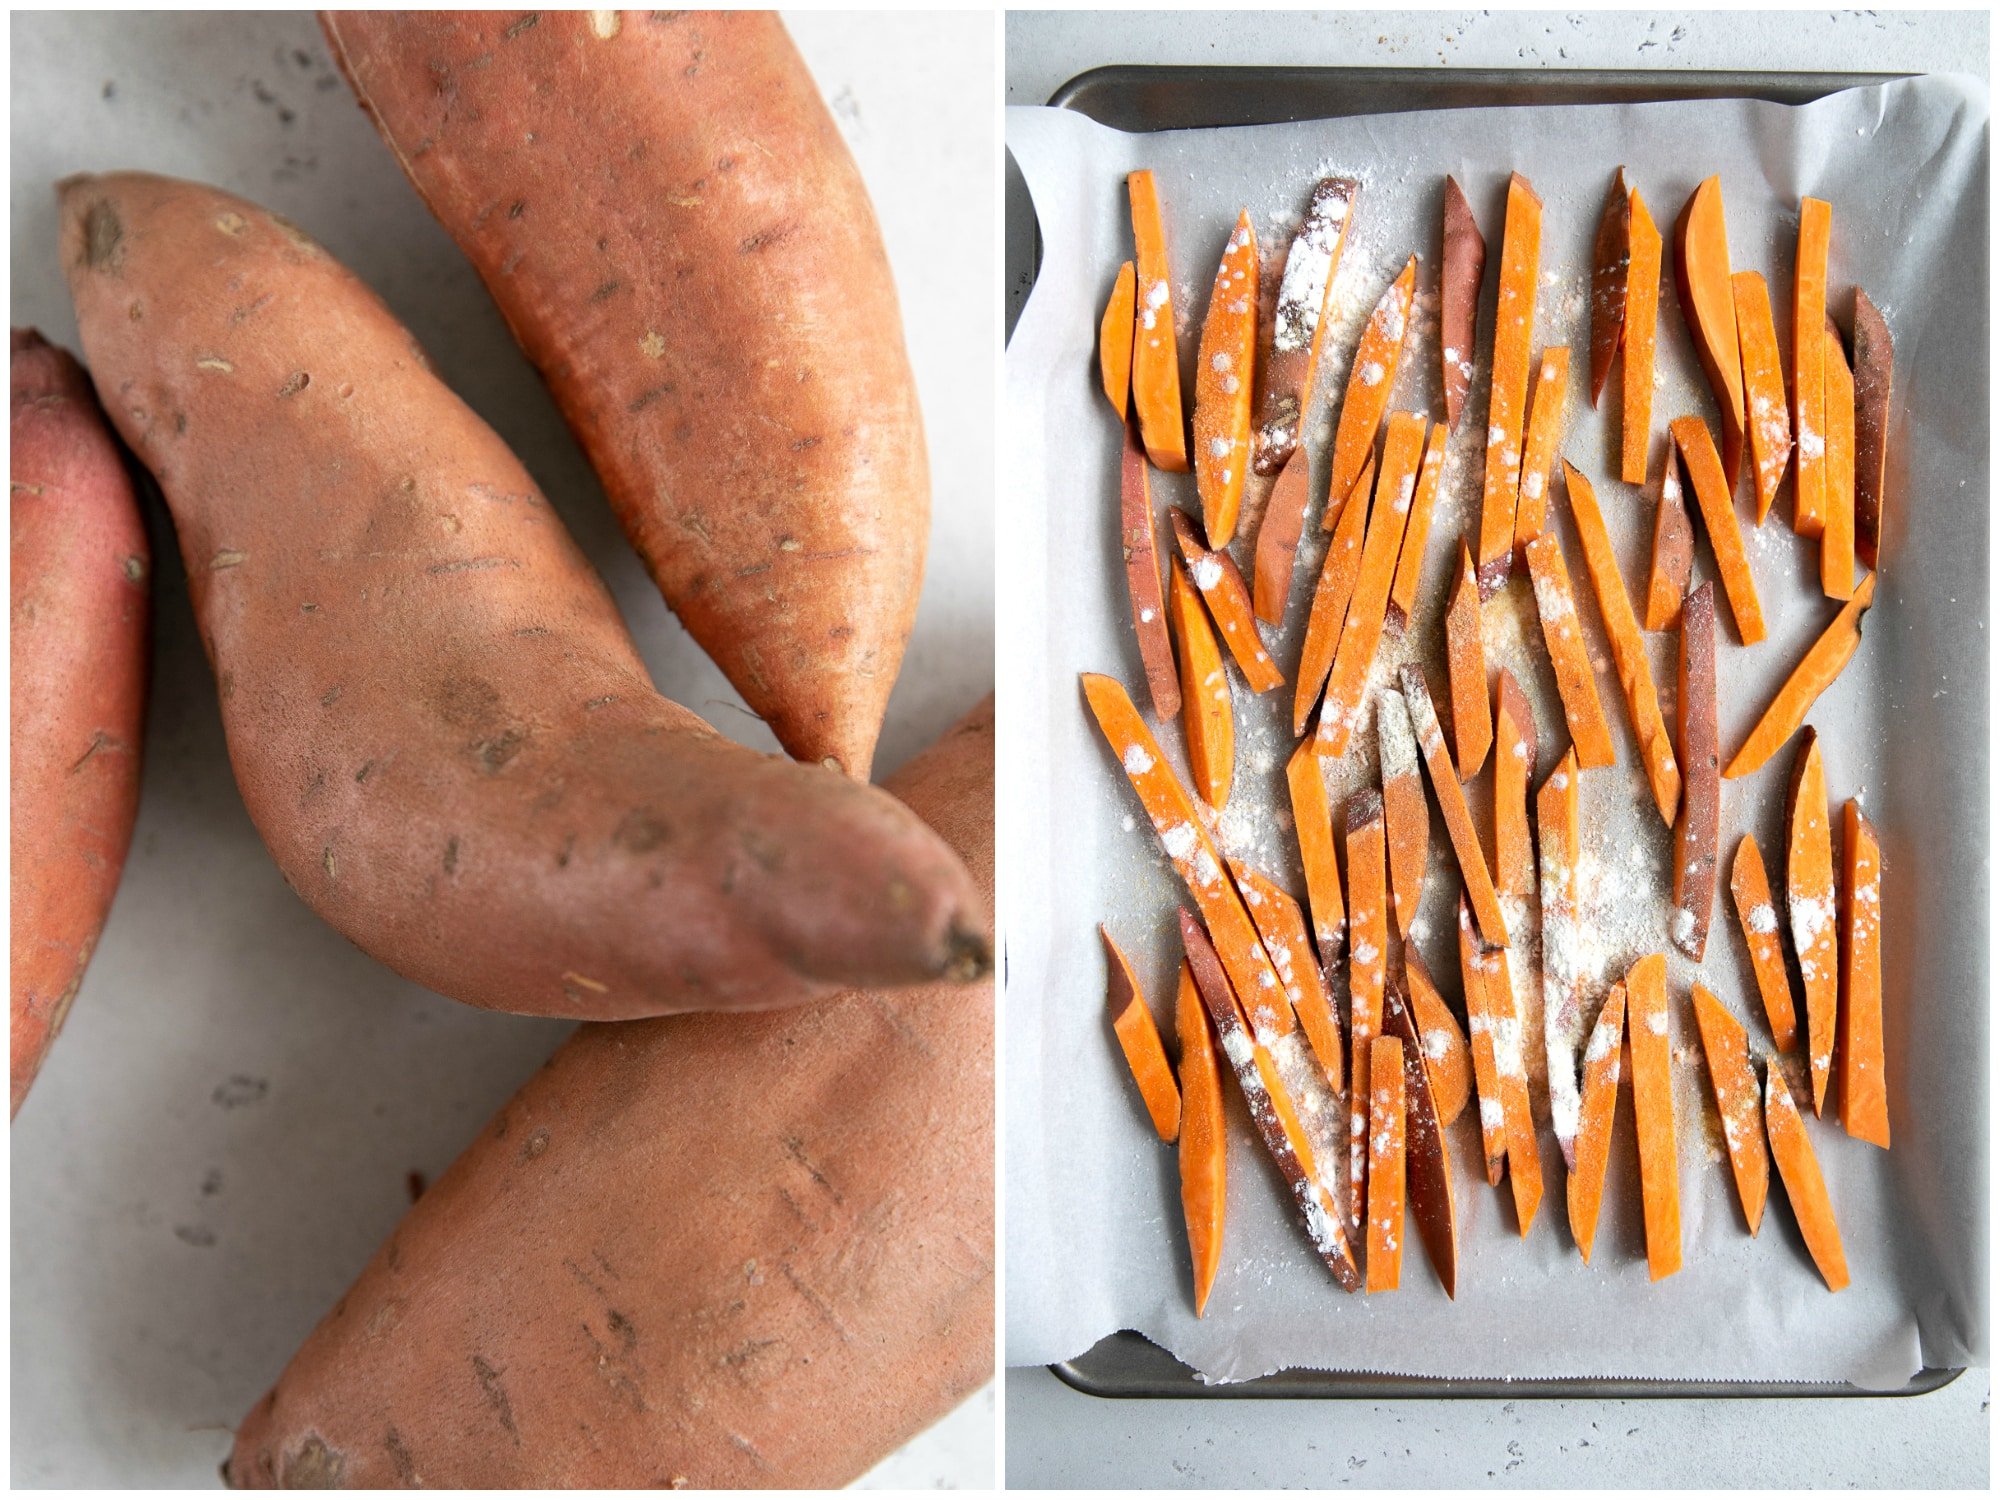 Two images in a collage side-by-side; the first image shows raw sweet potatoes and the other shows uncooked, raw, sweet potato fries sprinkled with seasonings and cornstarch.